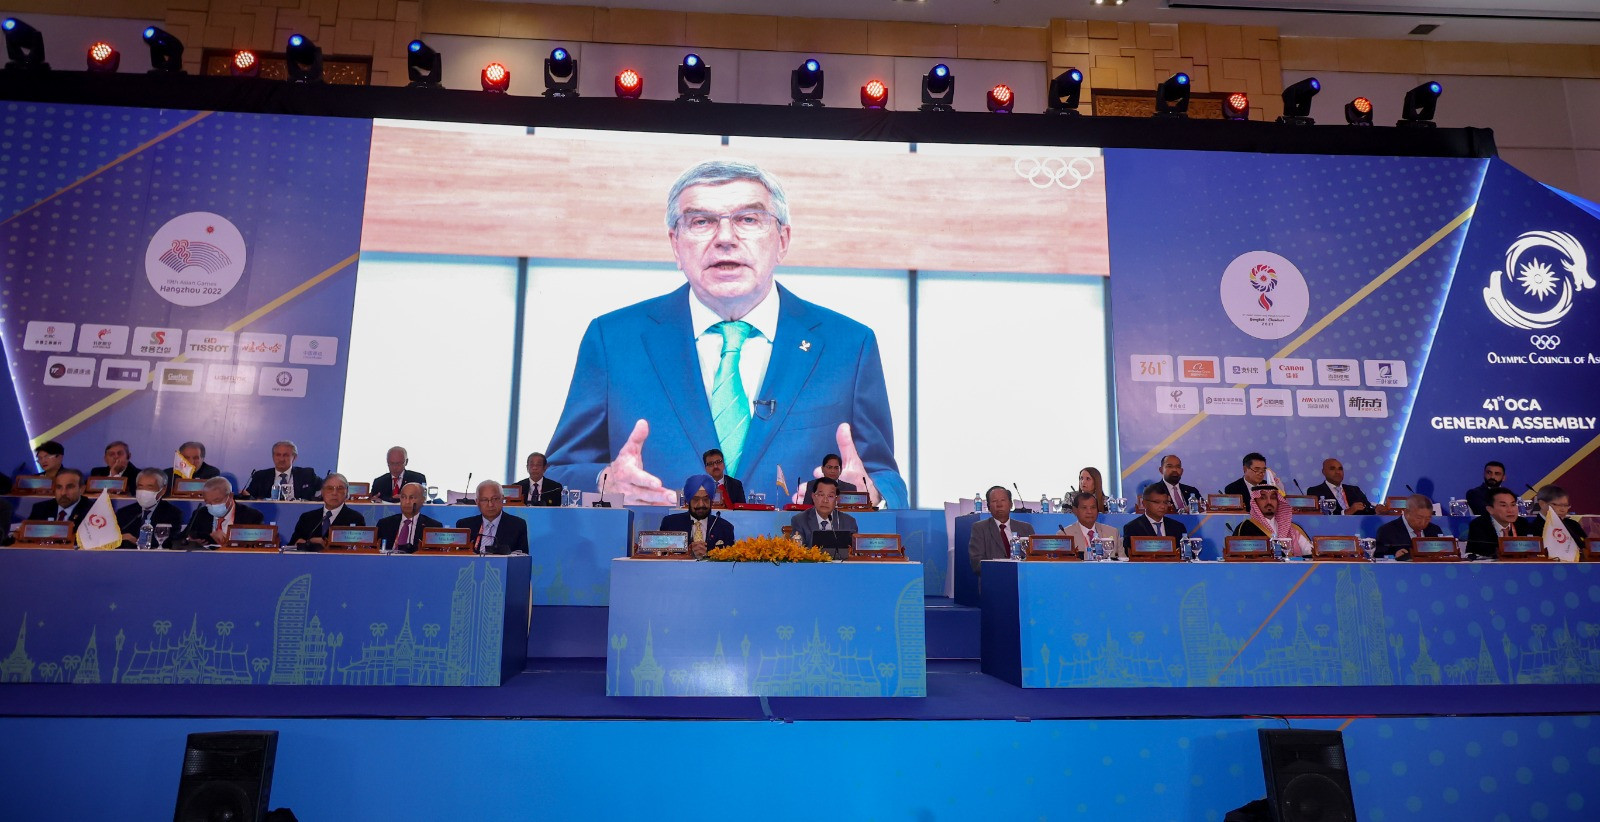 IOC President Thomas Bach said Asia "has written Olympic history" by staging three consecutive Olympic Games ©OCA